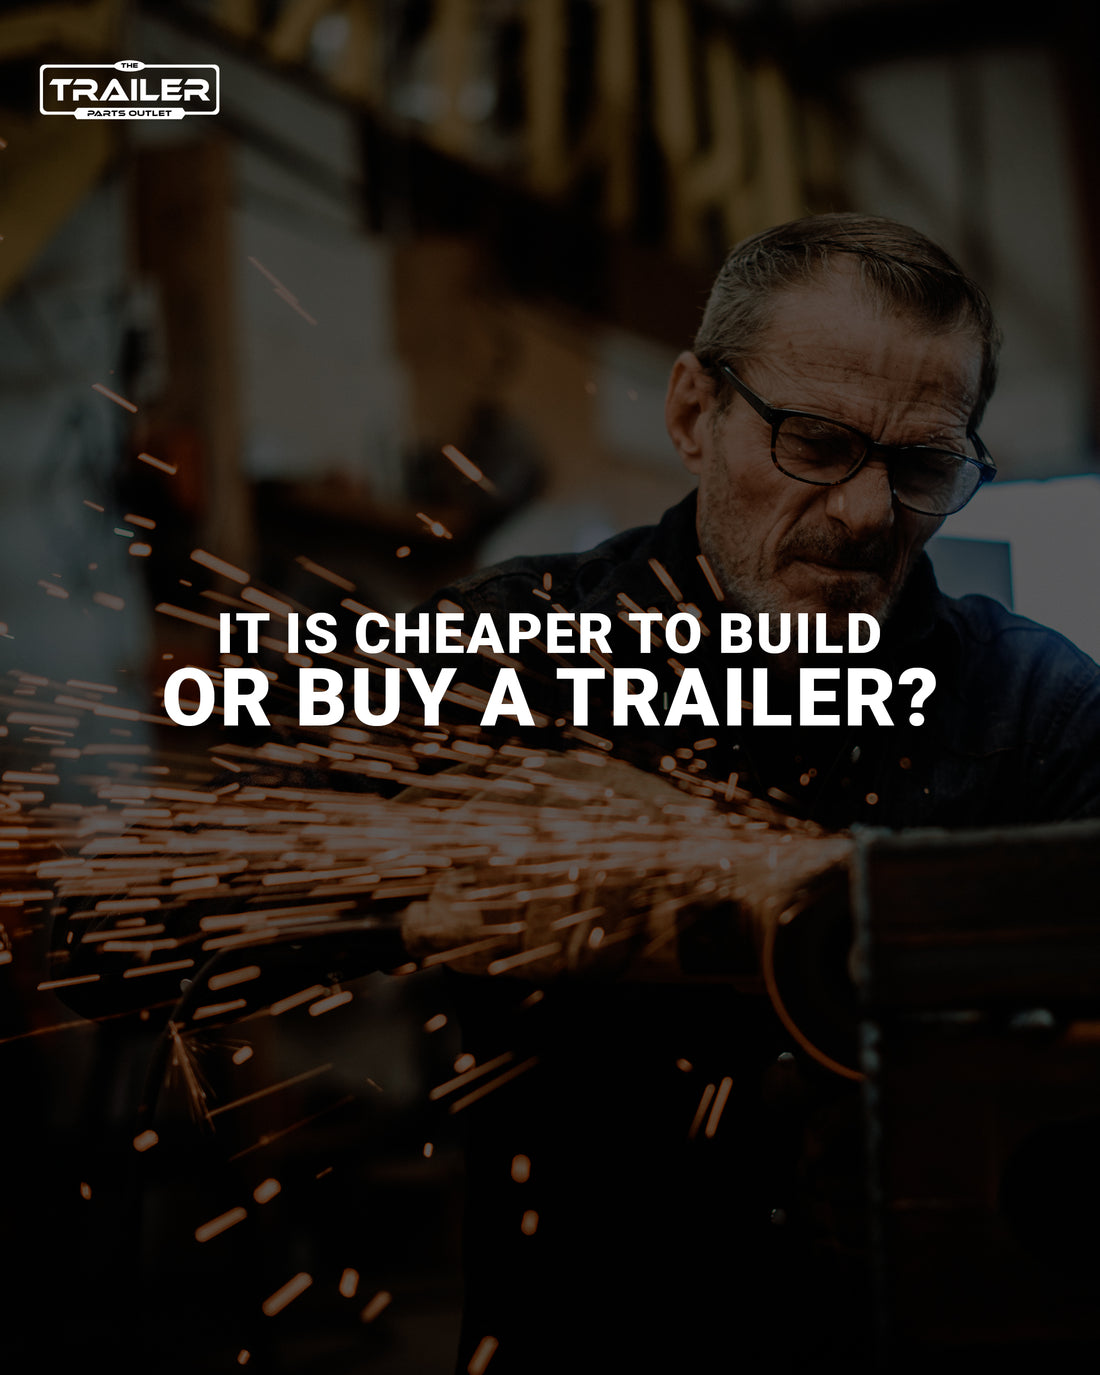 Is It Cheaper to Build a Trailer or Buy One?